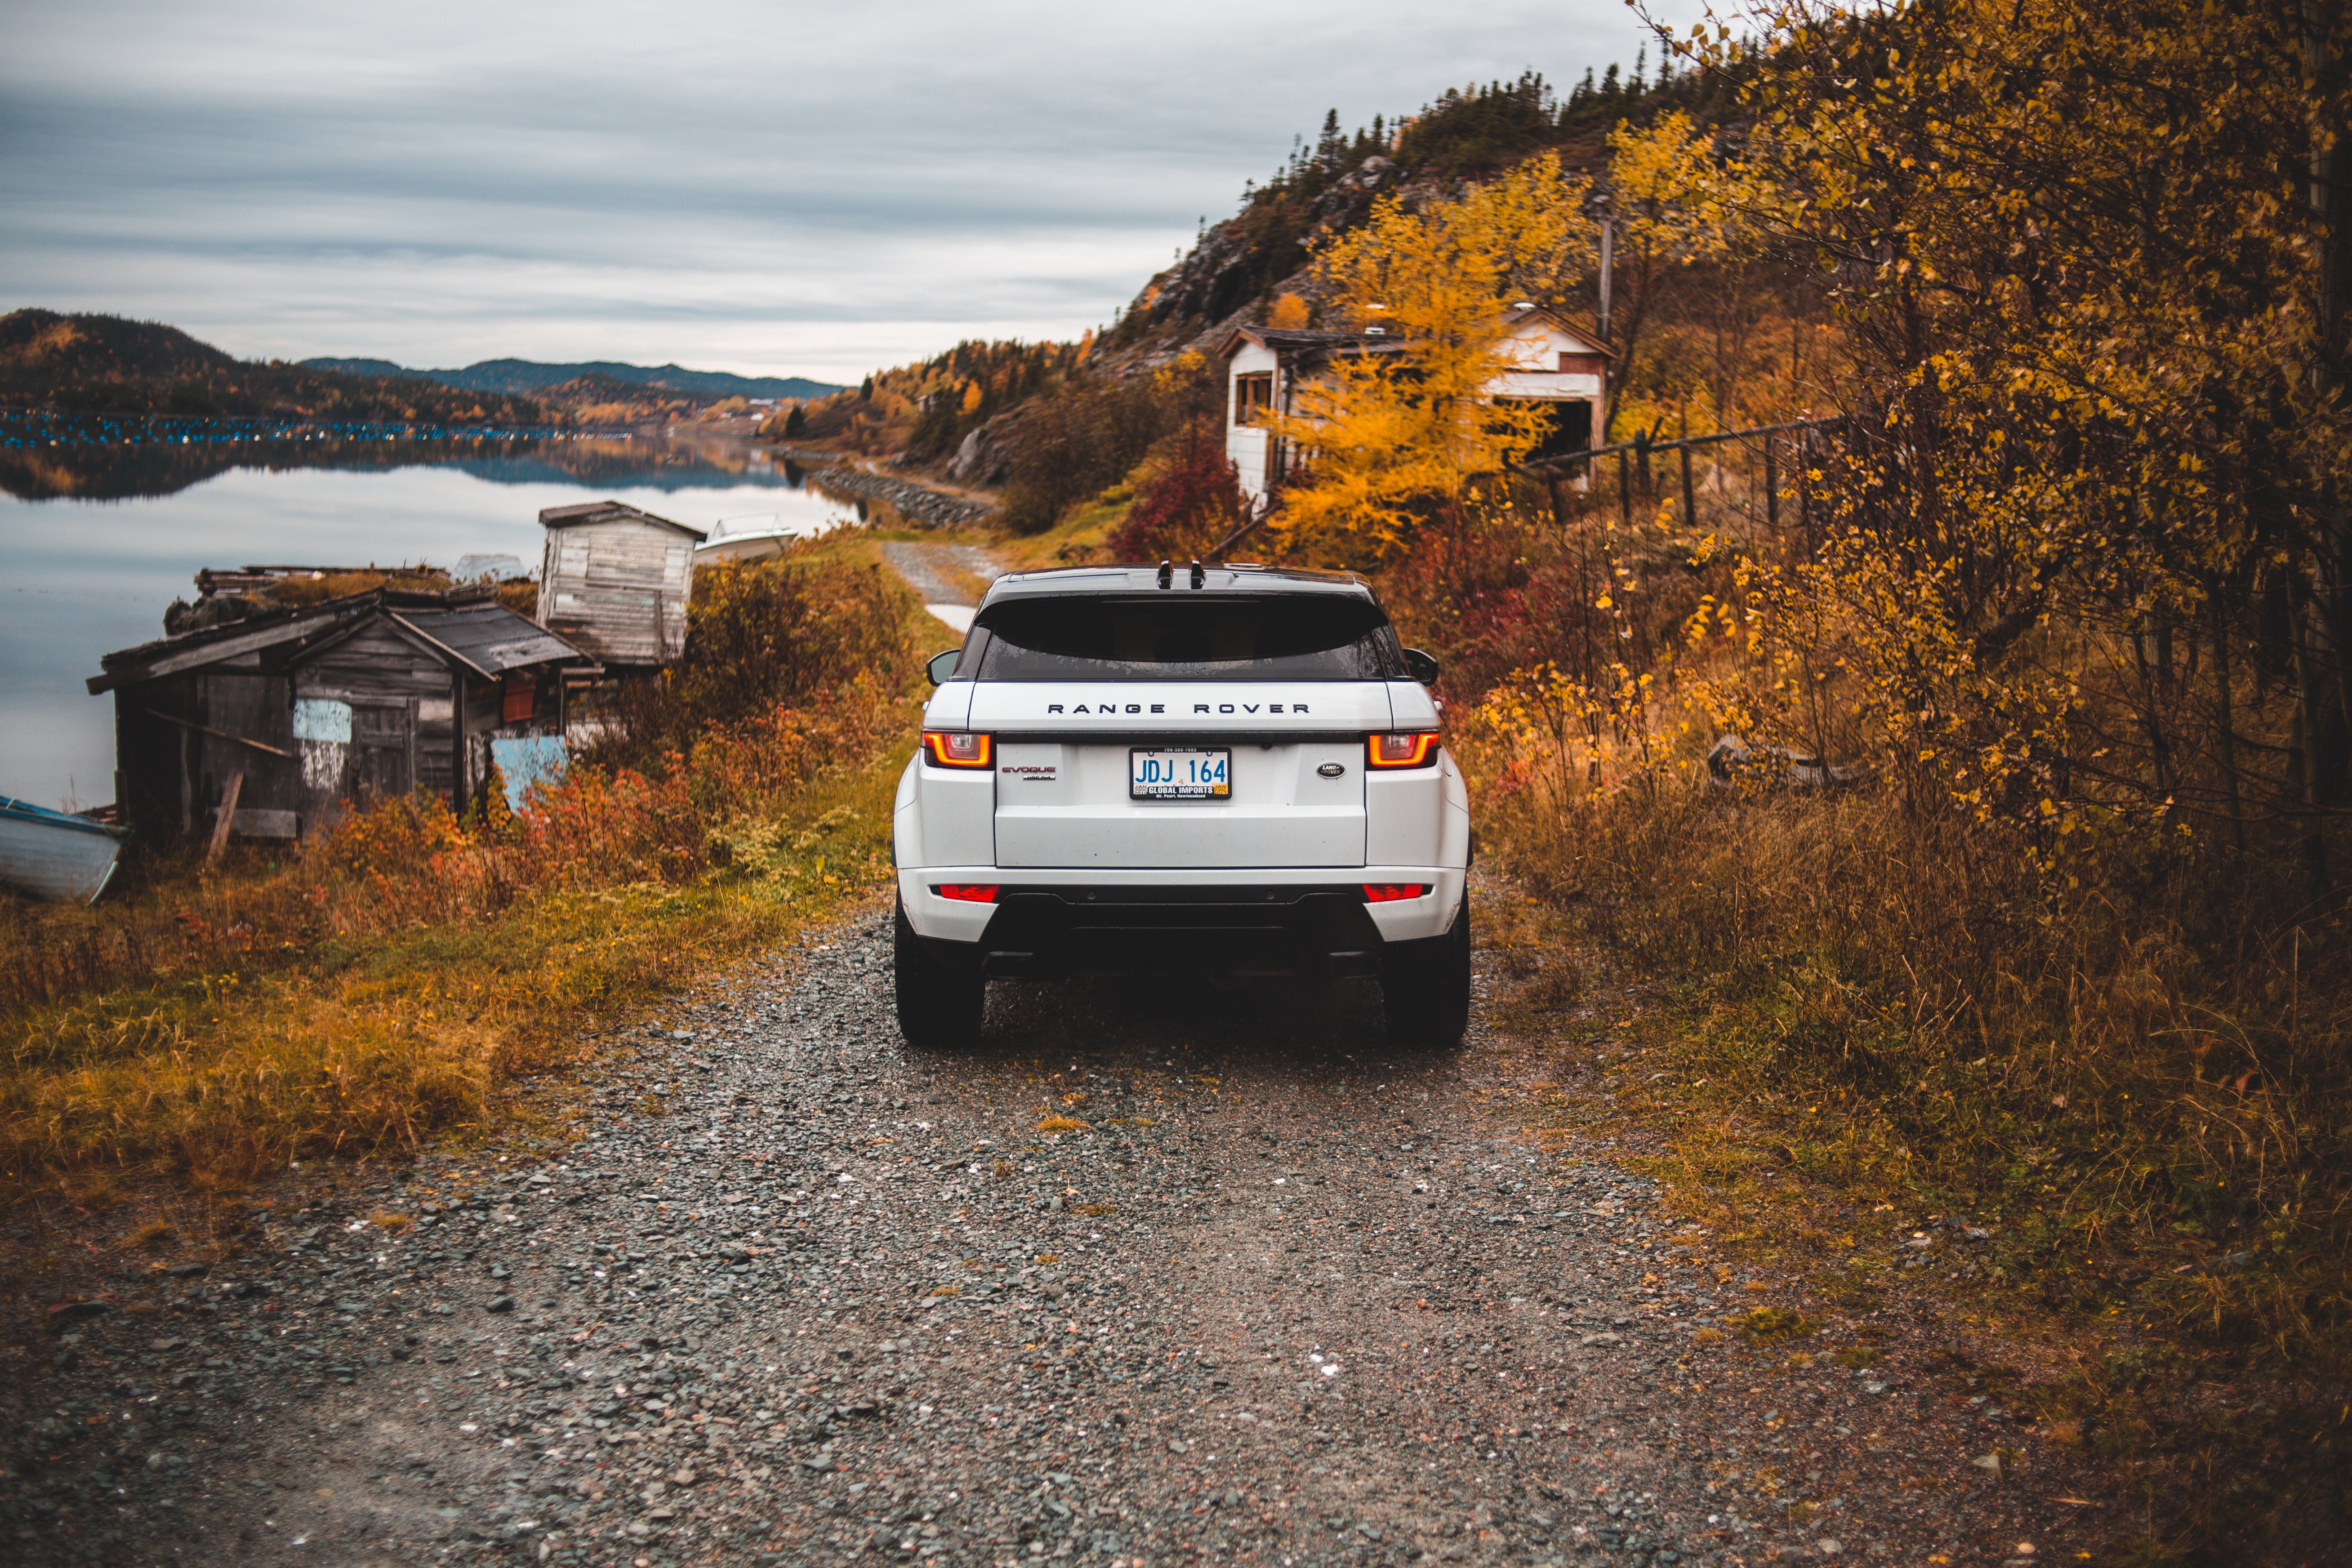 range rover, suv, land rover, cars, autumn, back view, rear view